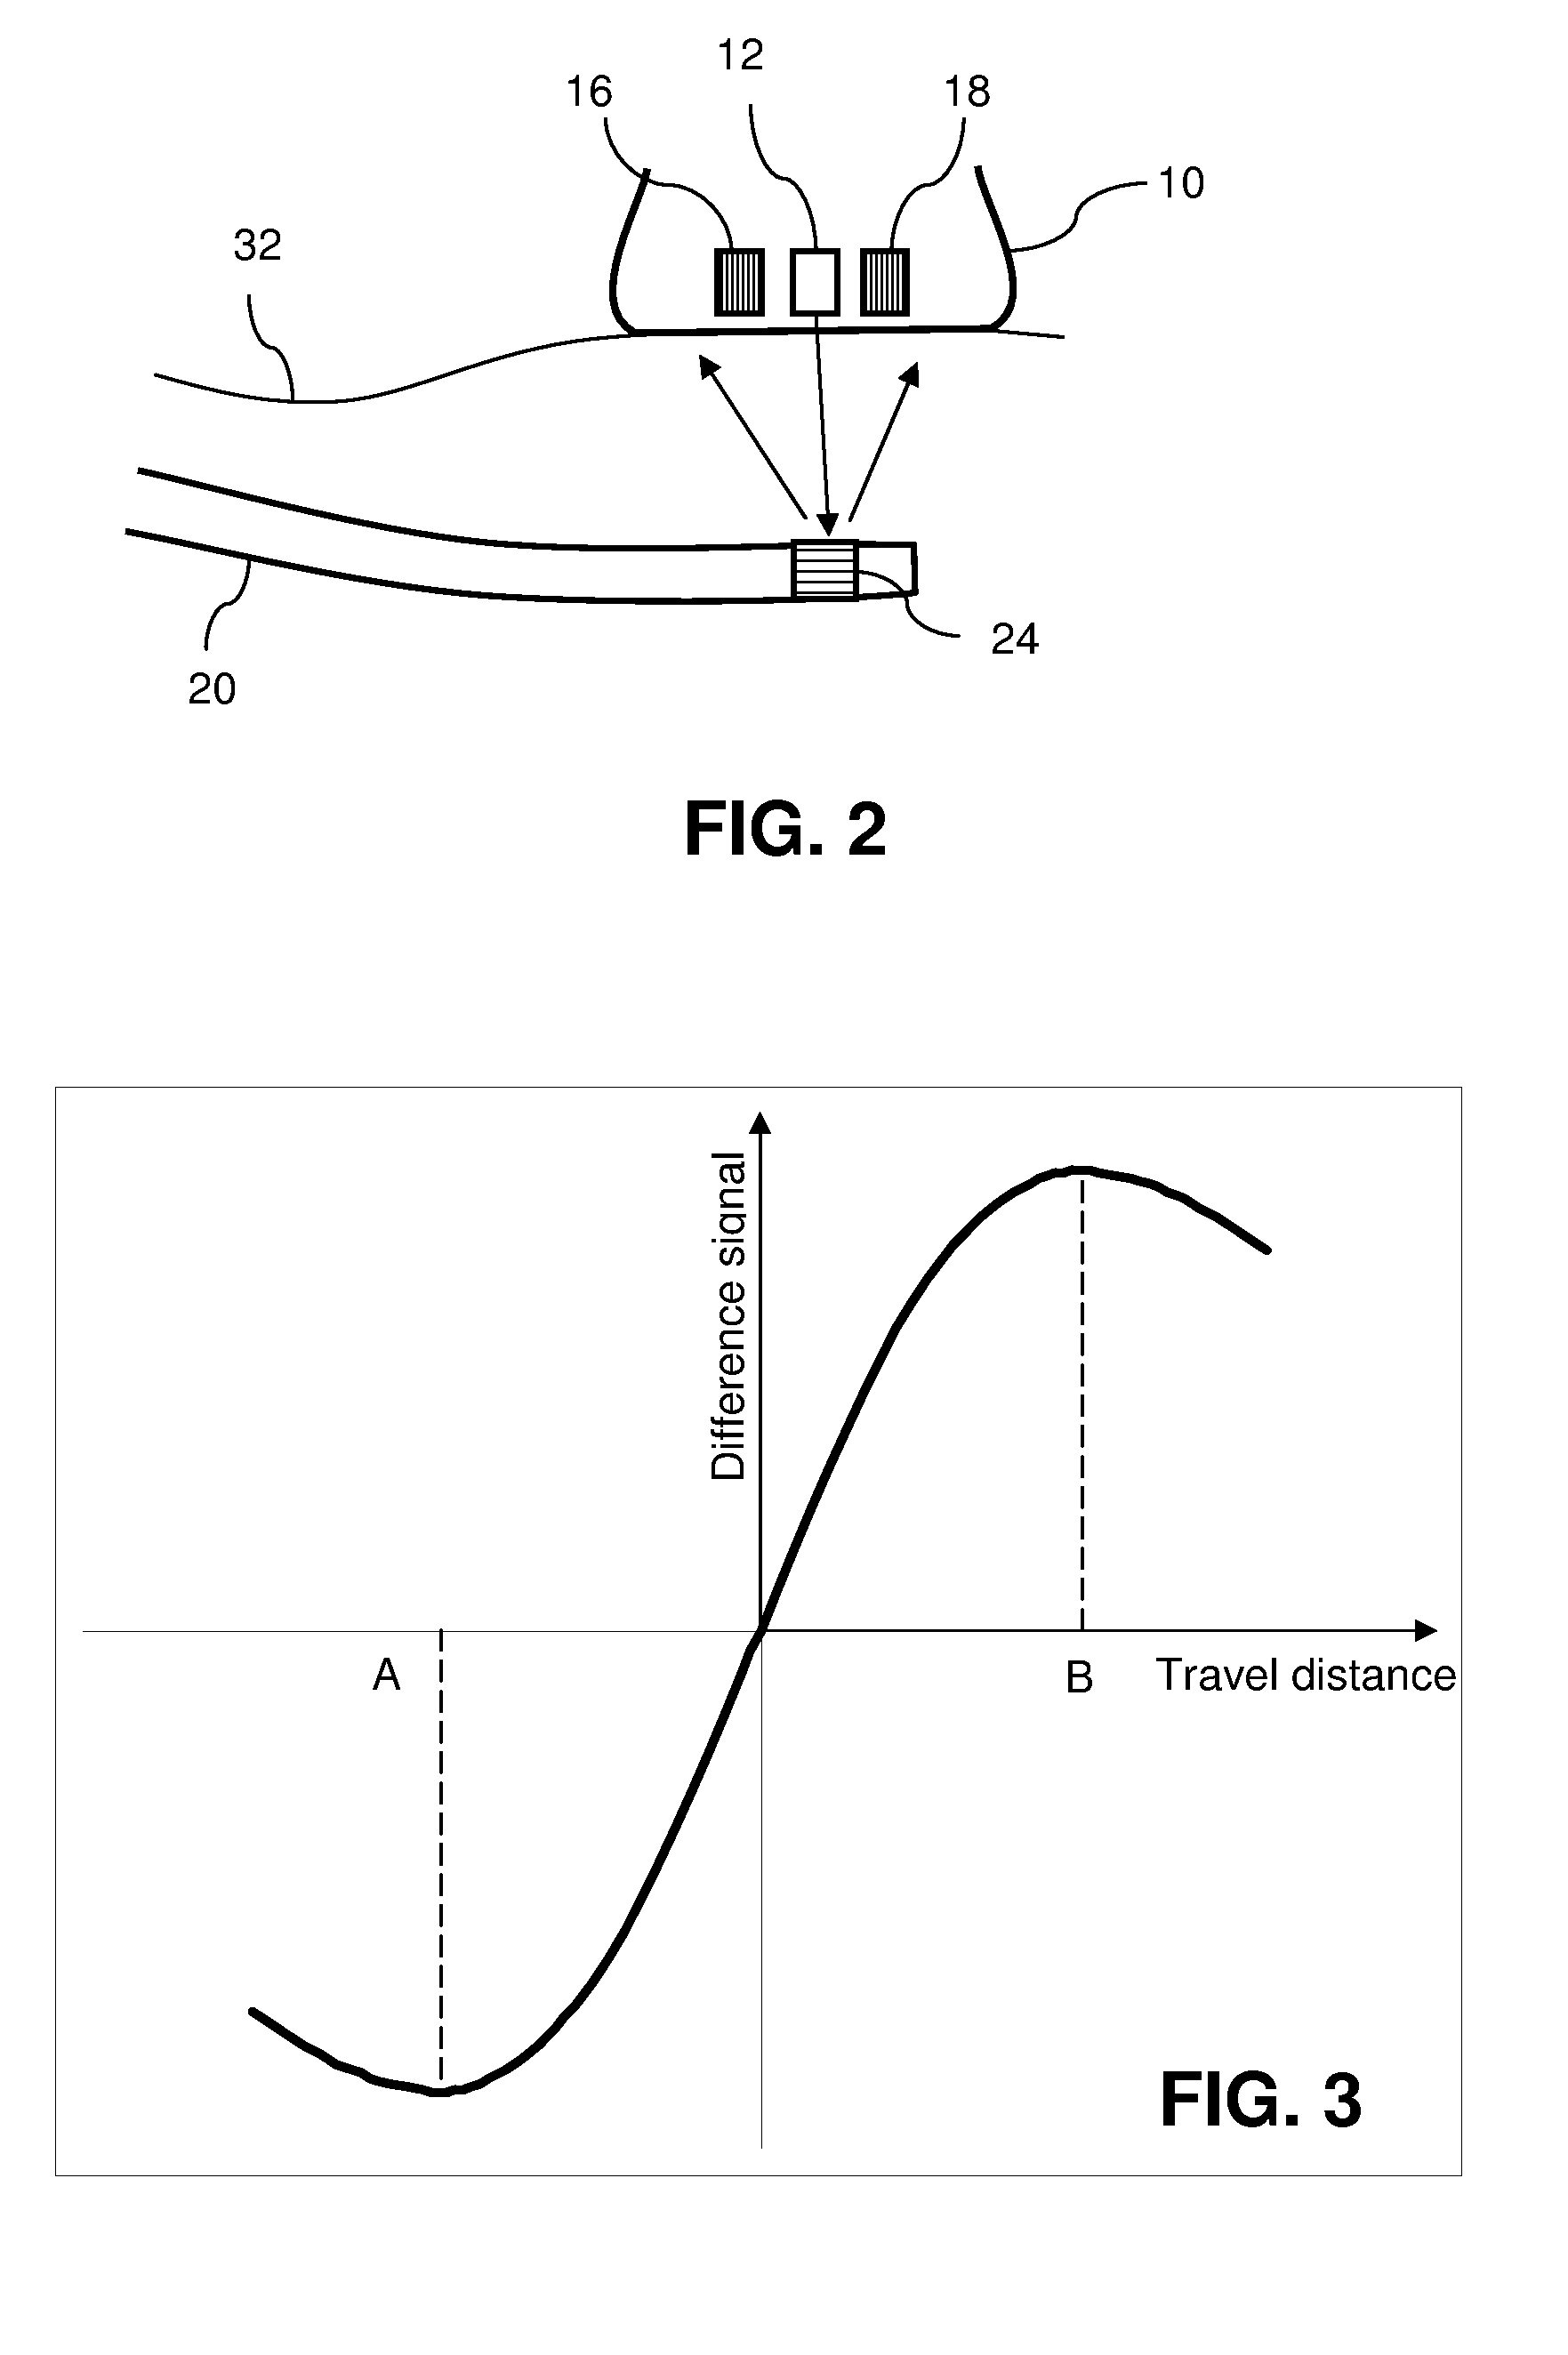 System for optically detecting position of an indwelling catheter